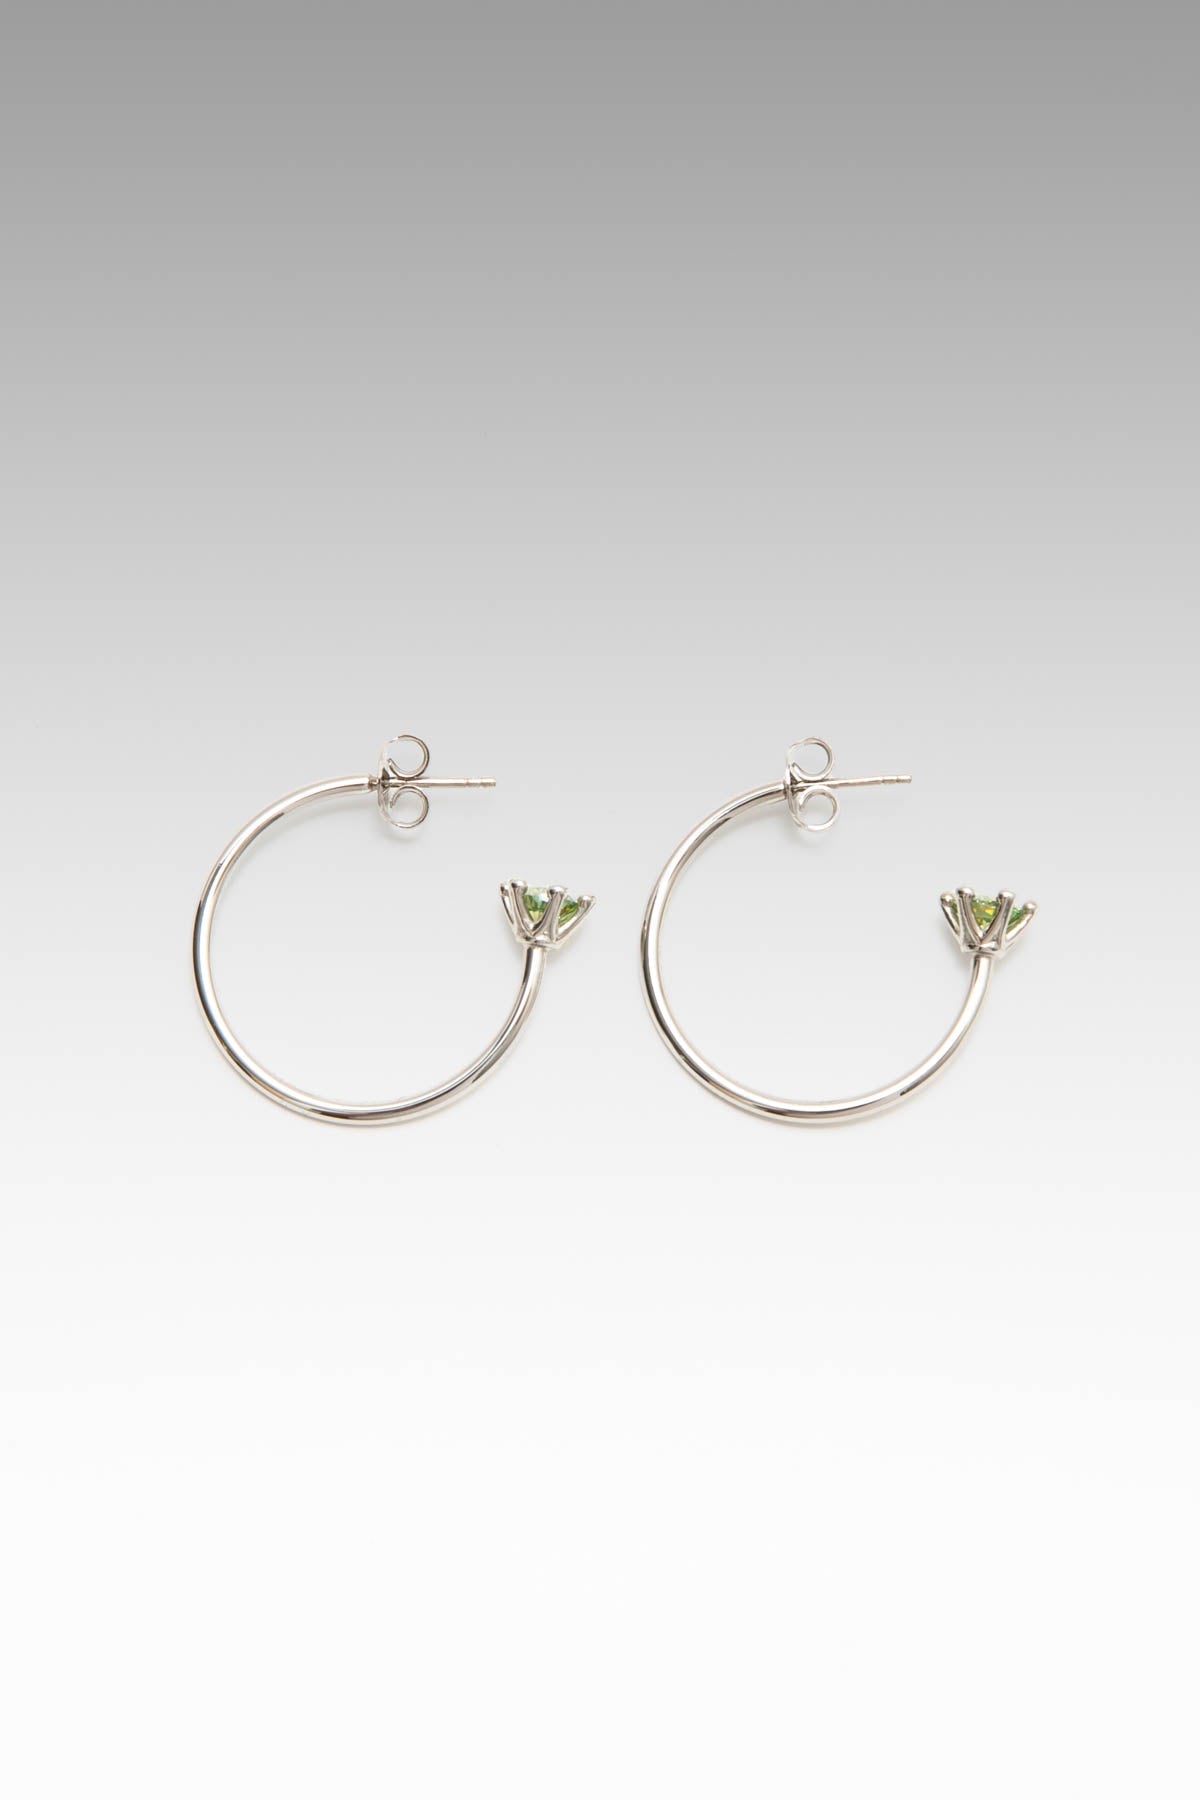 B213_Solitaire Hoops_L_01